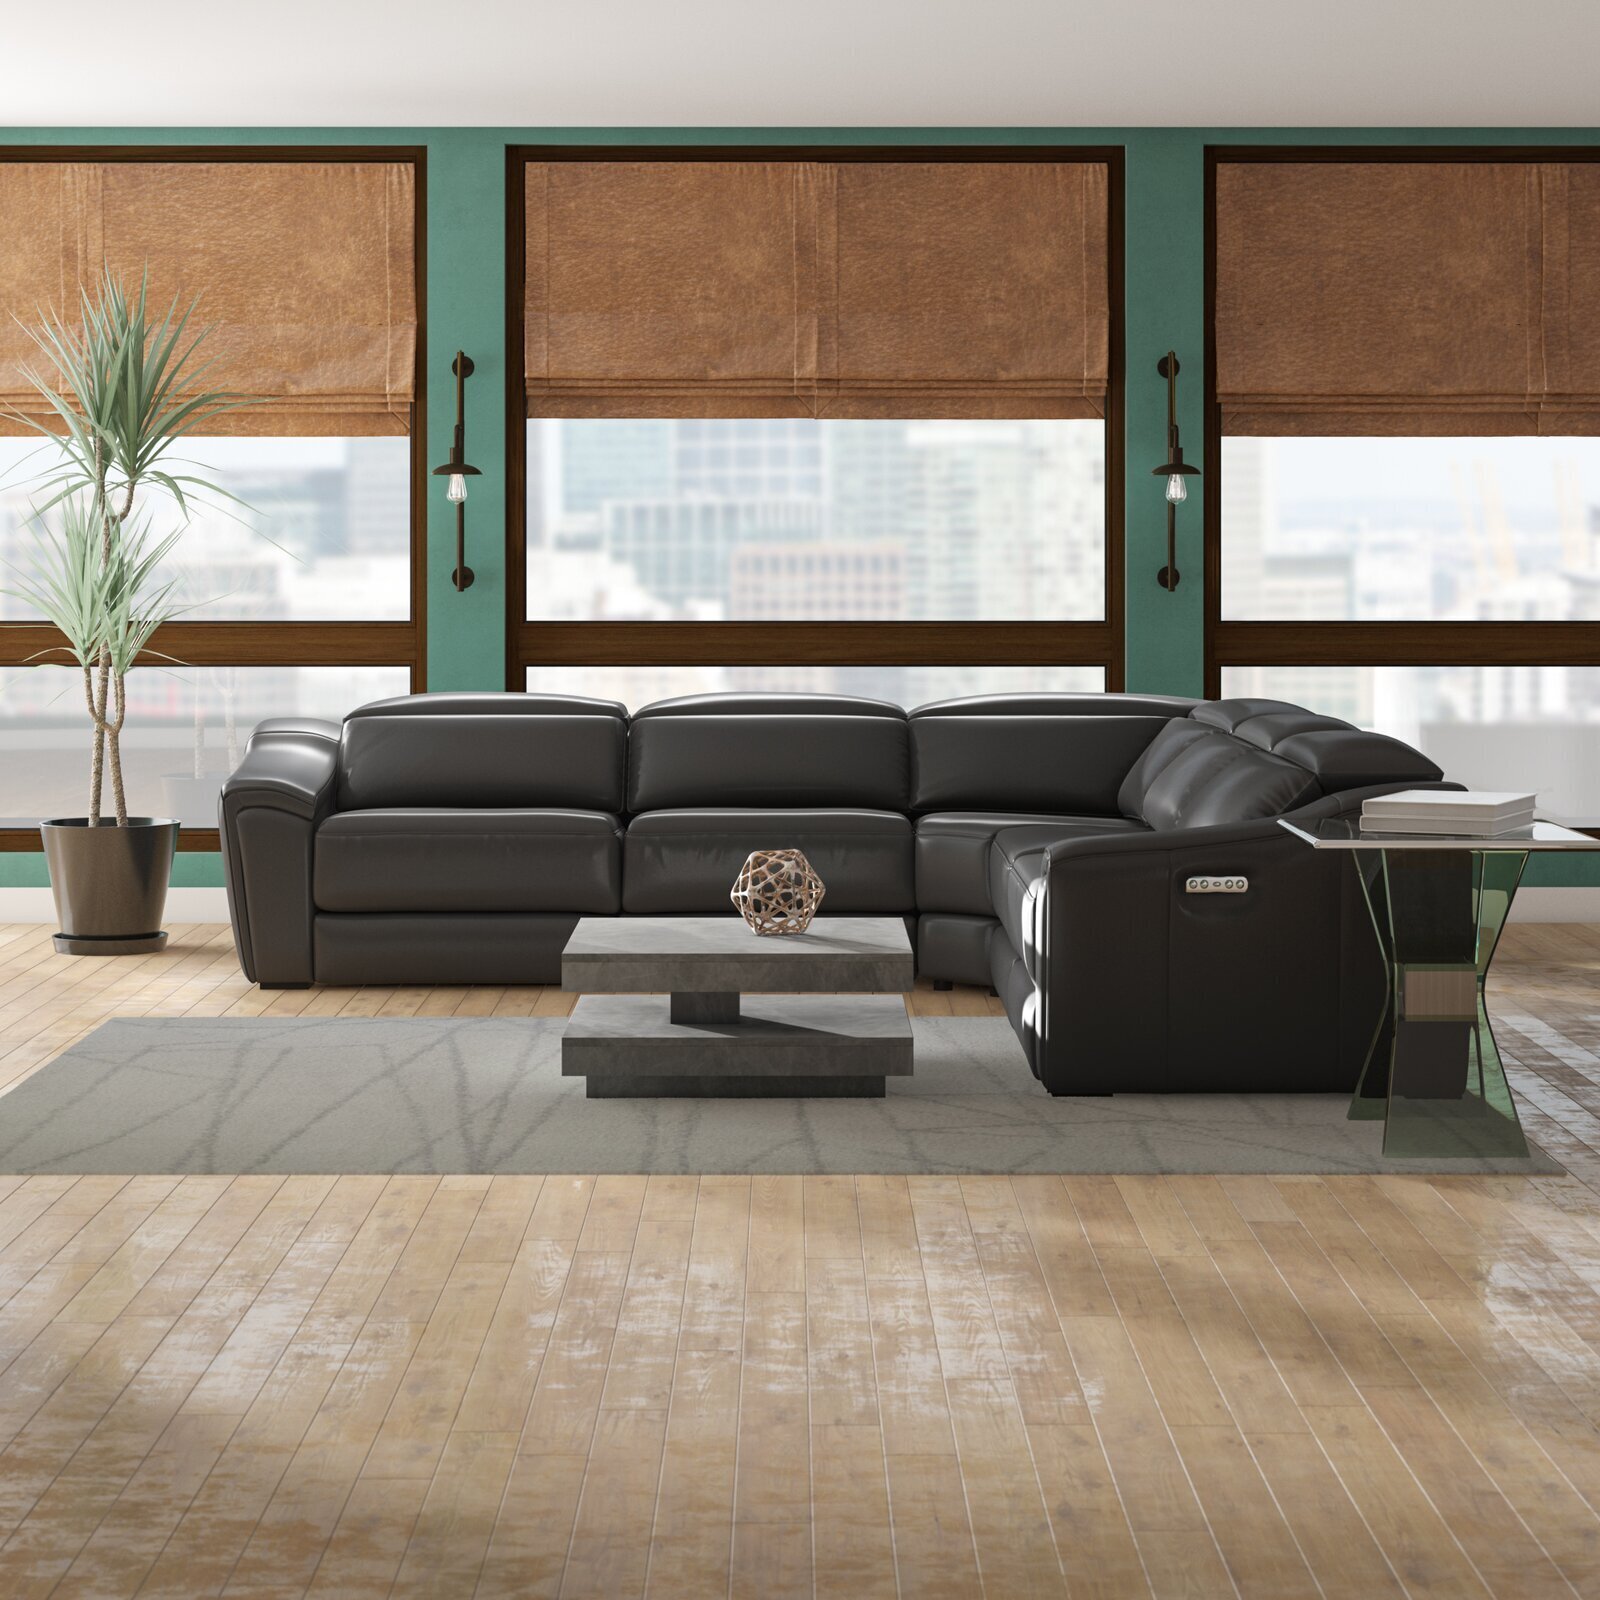 Low Profile Italian Curved Leather Sectional Sofa